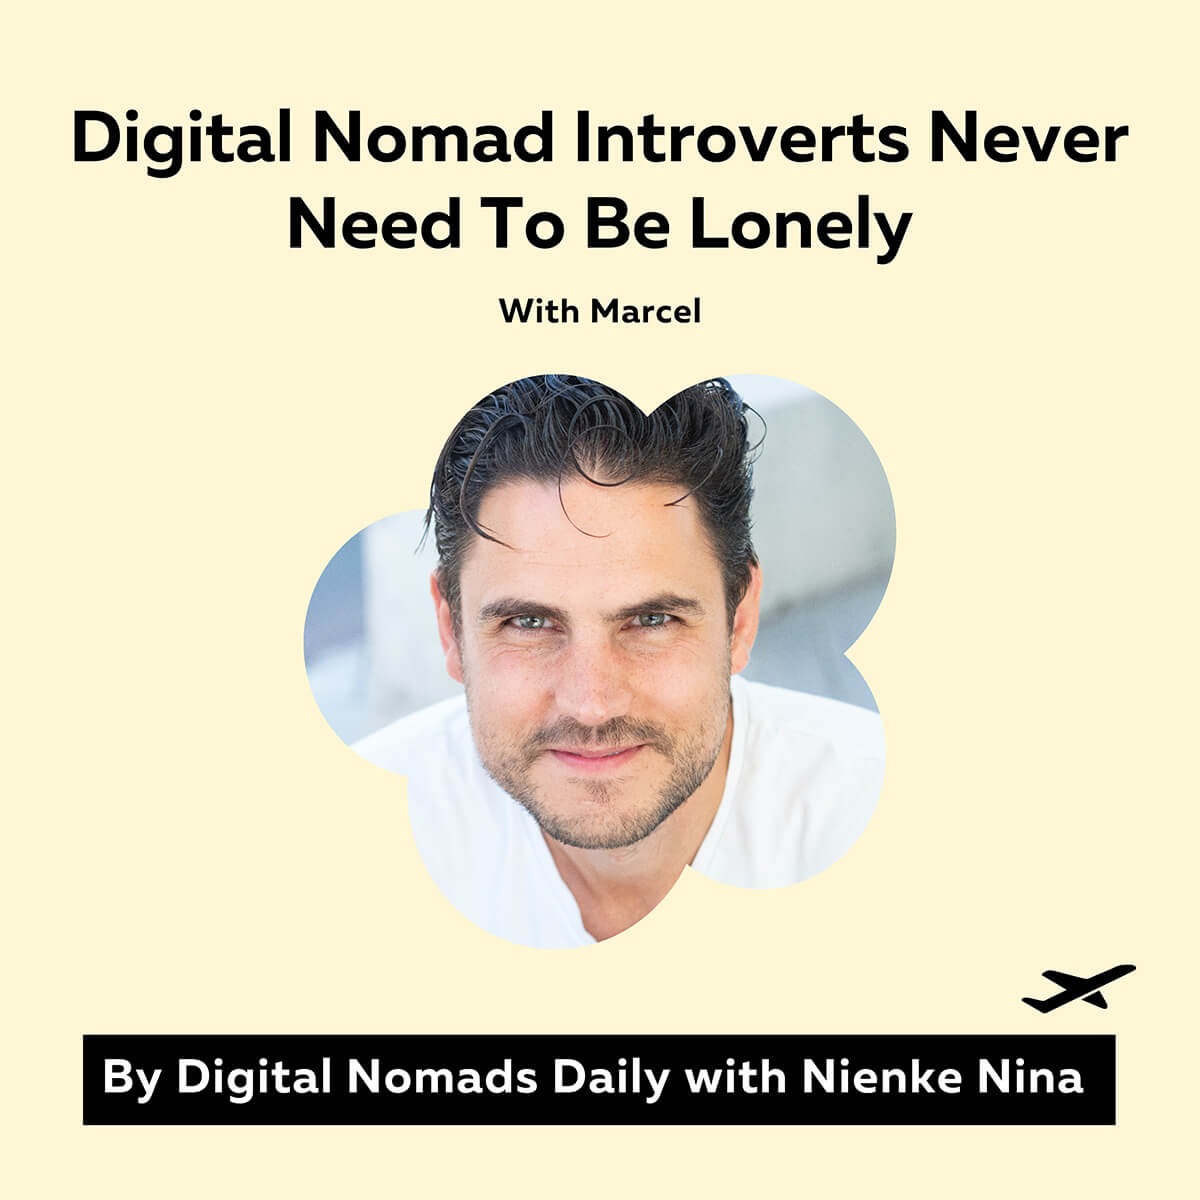 Digital Nomads Daily Podcast Cover Digital Nomad Introverts Never Need To Be Lonely With Marcel (1)